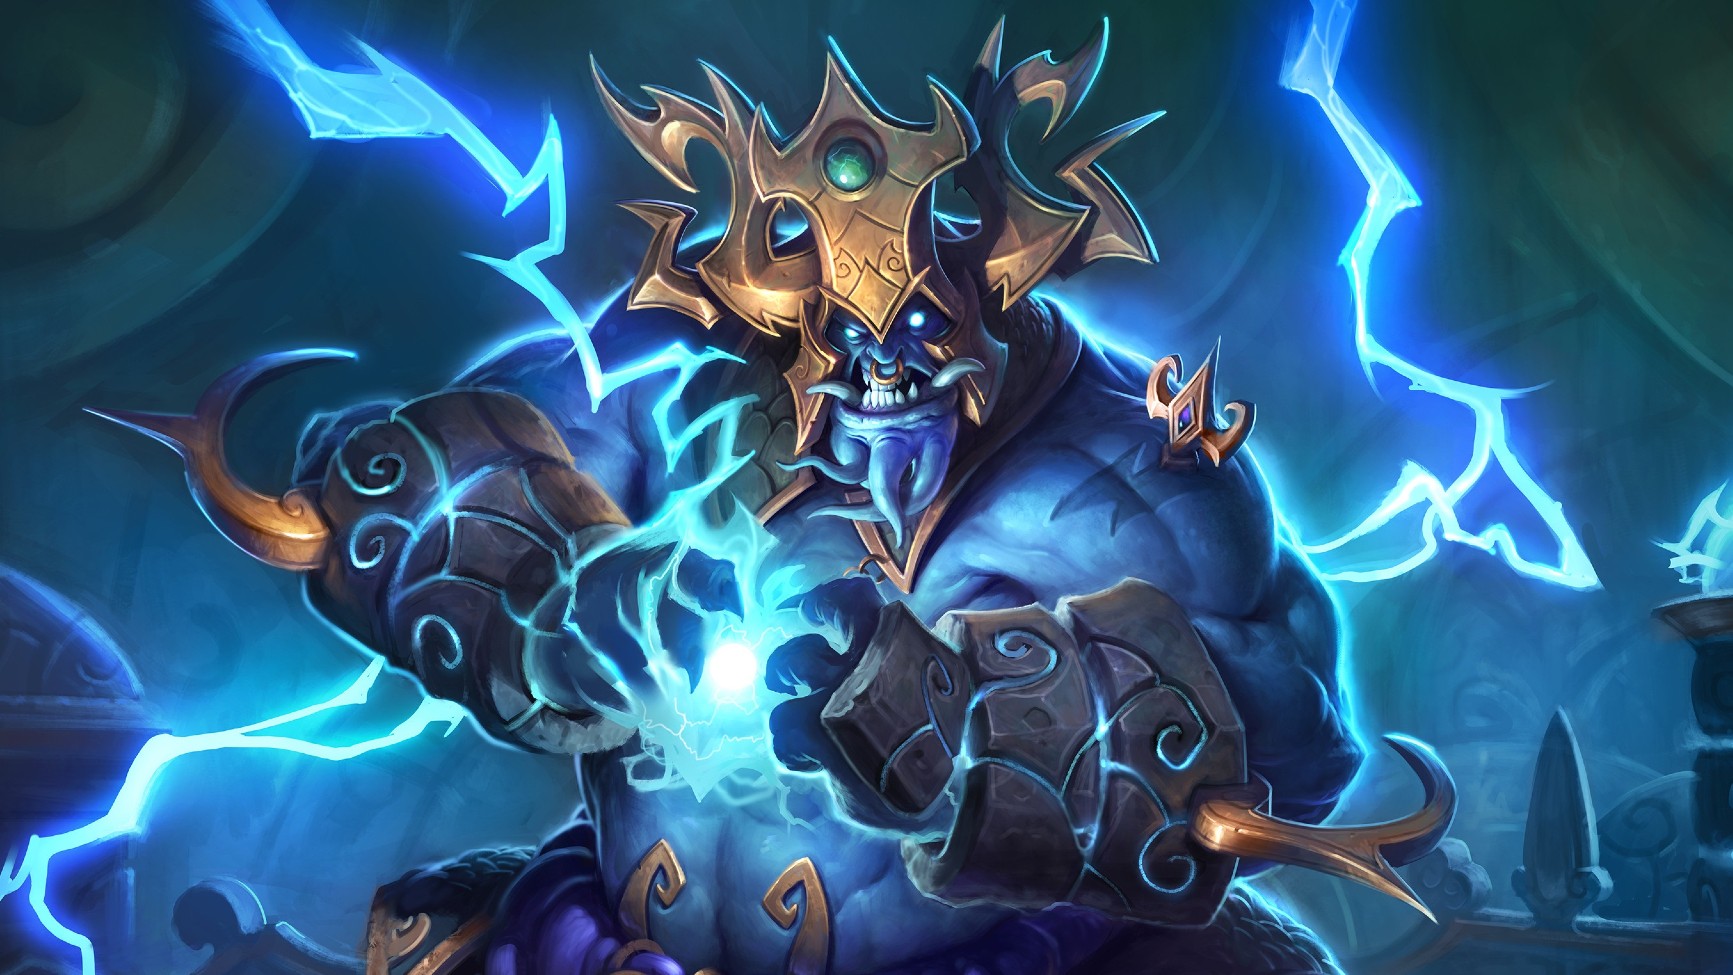  Hearthstone hotfix will stop sneaky Shamans from exploiting spell damage totems 